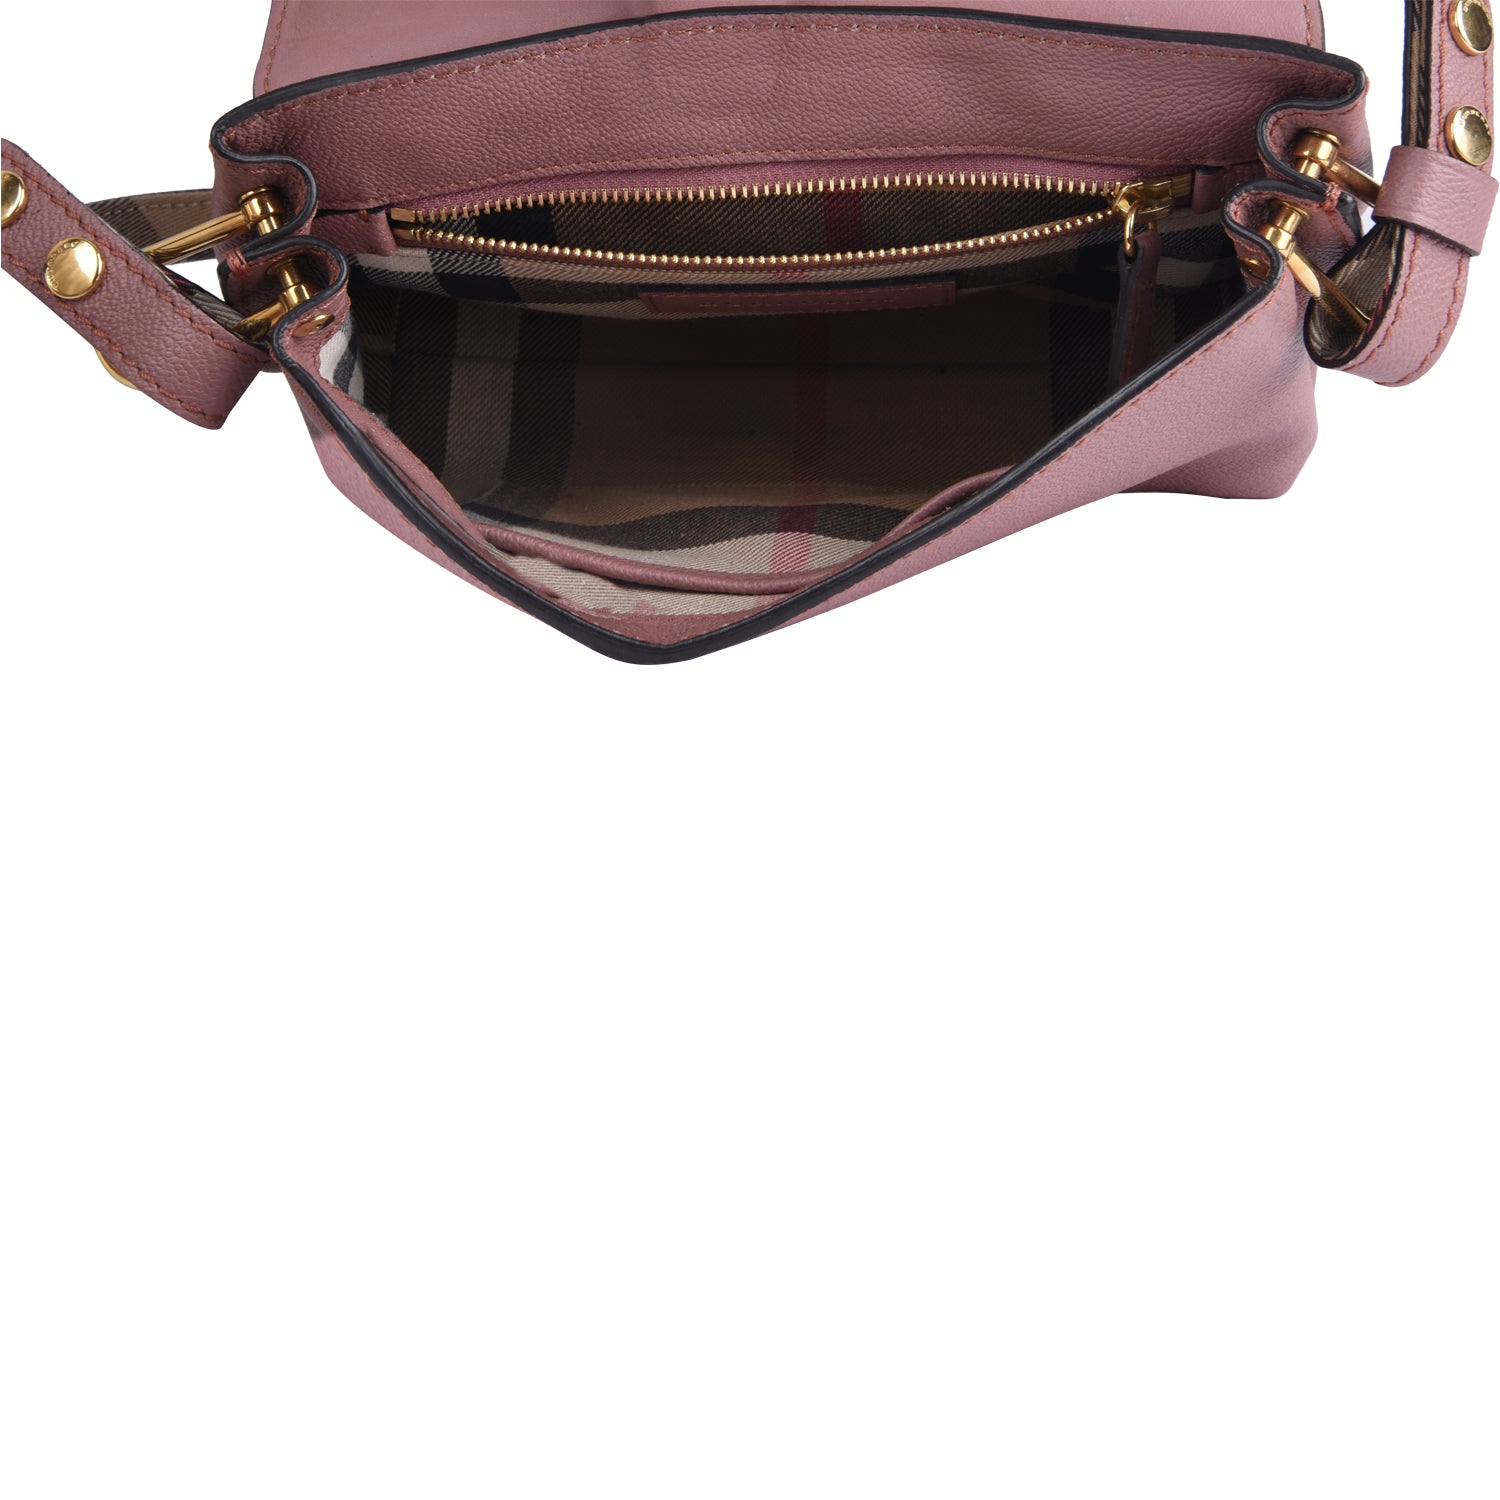 Burberry Dusty Pink Grain Leather Bag